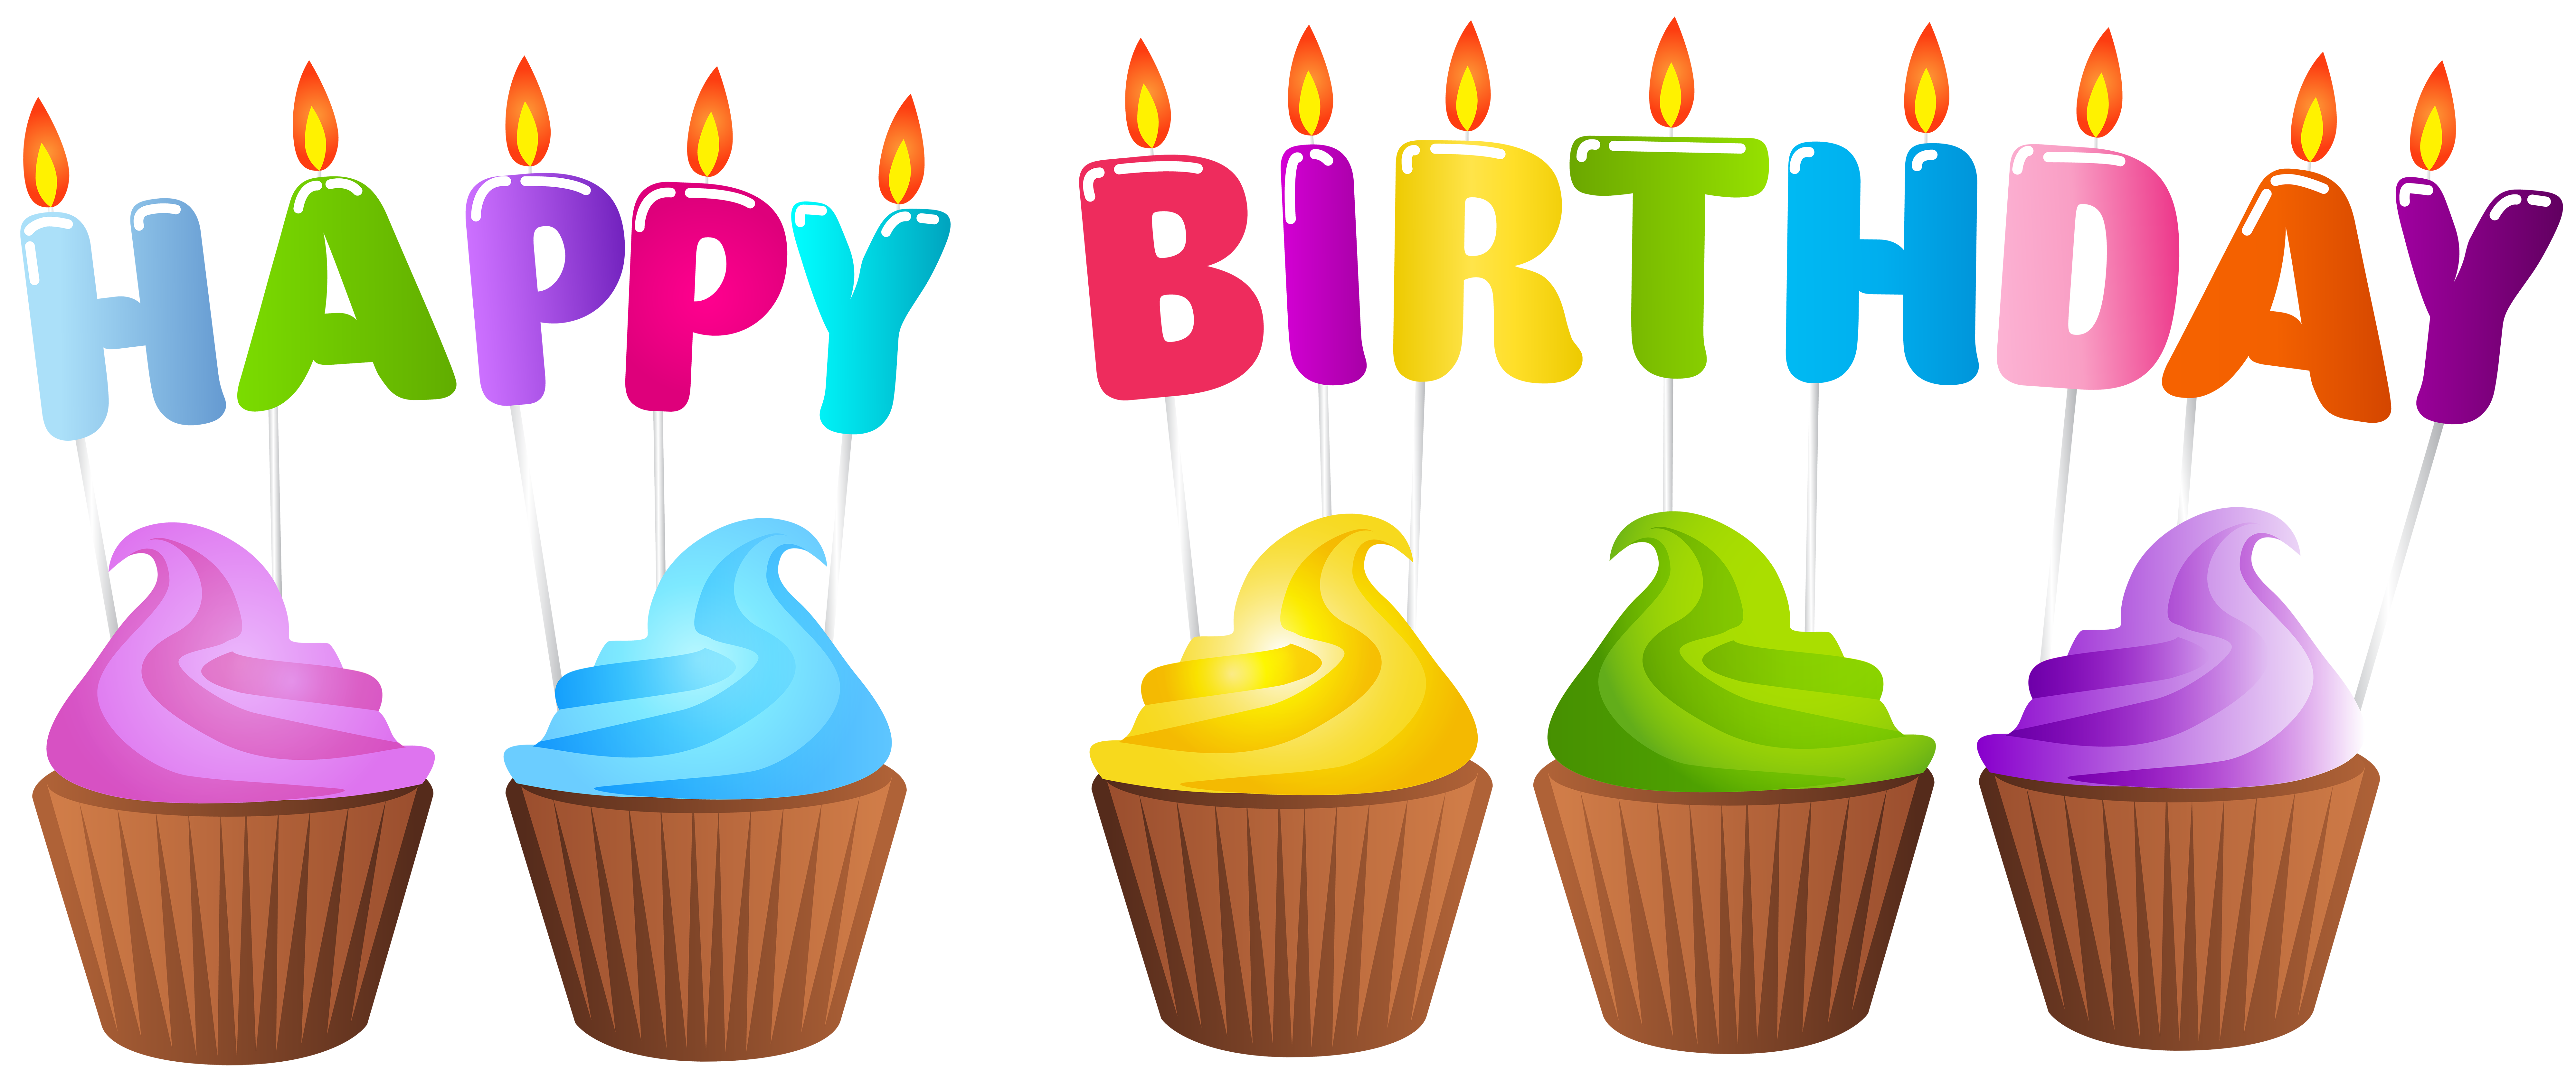 Happy birthday muffins png. Clipart cupcake banner